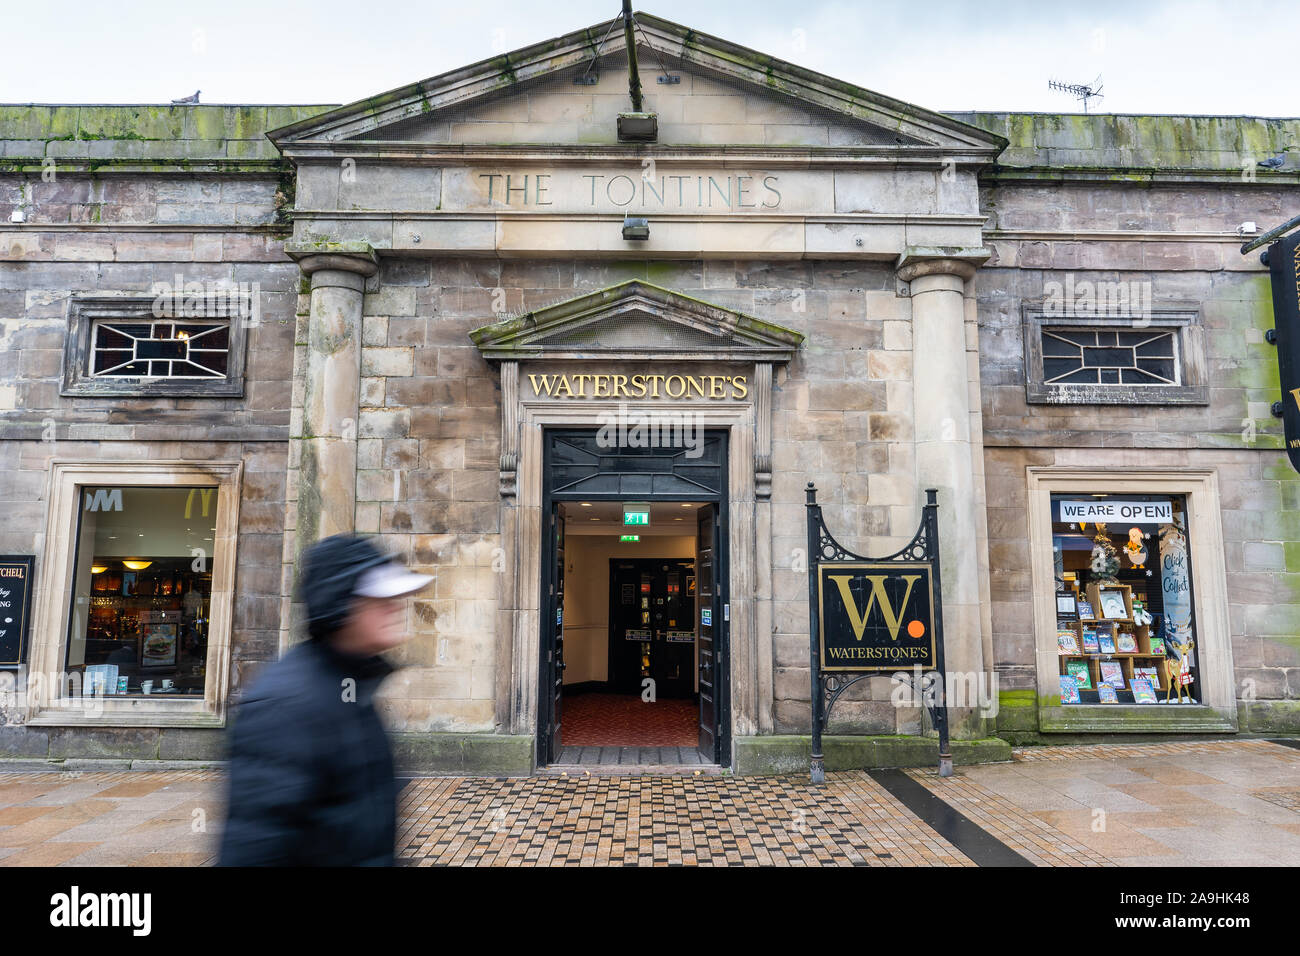 People, shoppers walk past Waterstones the mainstream and academic book retailer that encourages browsing, Waterstones Booksellers Ltd, Café W brand Stock Photo